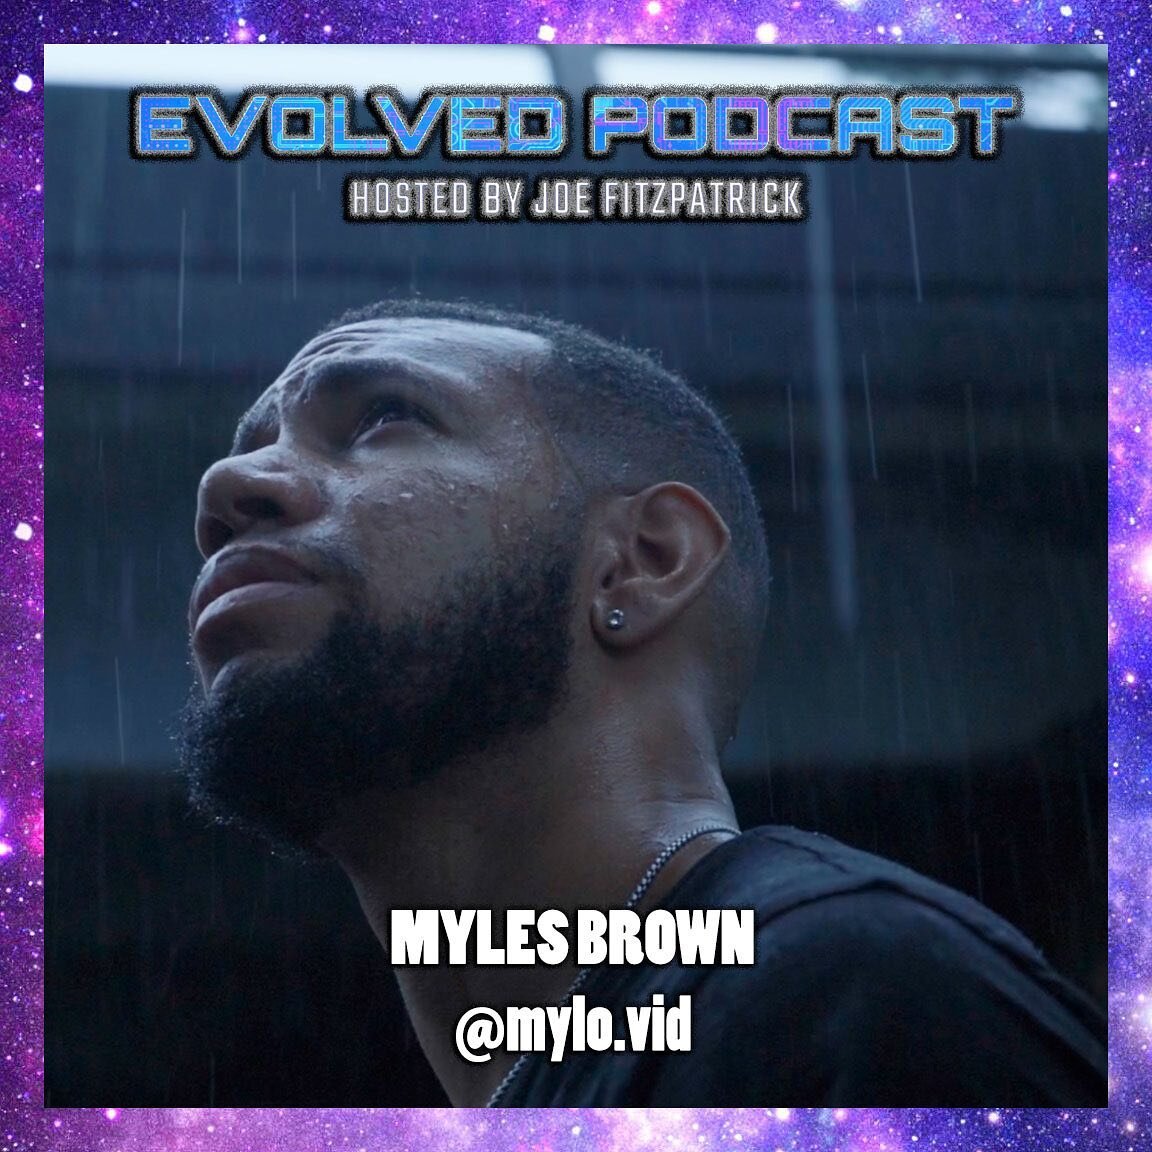 TRUST YOUR VISION: MYLES BROWN @mylo.vid EXPLORES RICHMOND SUBCULTURES THROUGH VIDEO PRODUCTION | EP. 017

Myles Brown, also known as &ldquo;M.Y.L.O.&rdquo; is a musician and filmmaker from Richmond, VA. His most recent project, &ldquo;Journey&rdquo;